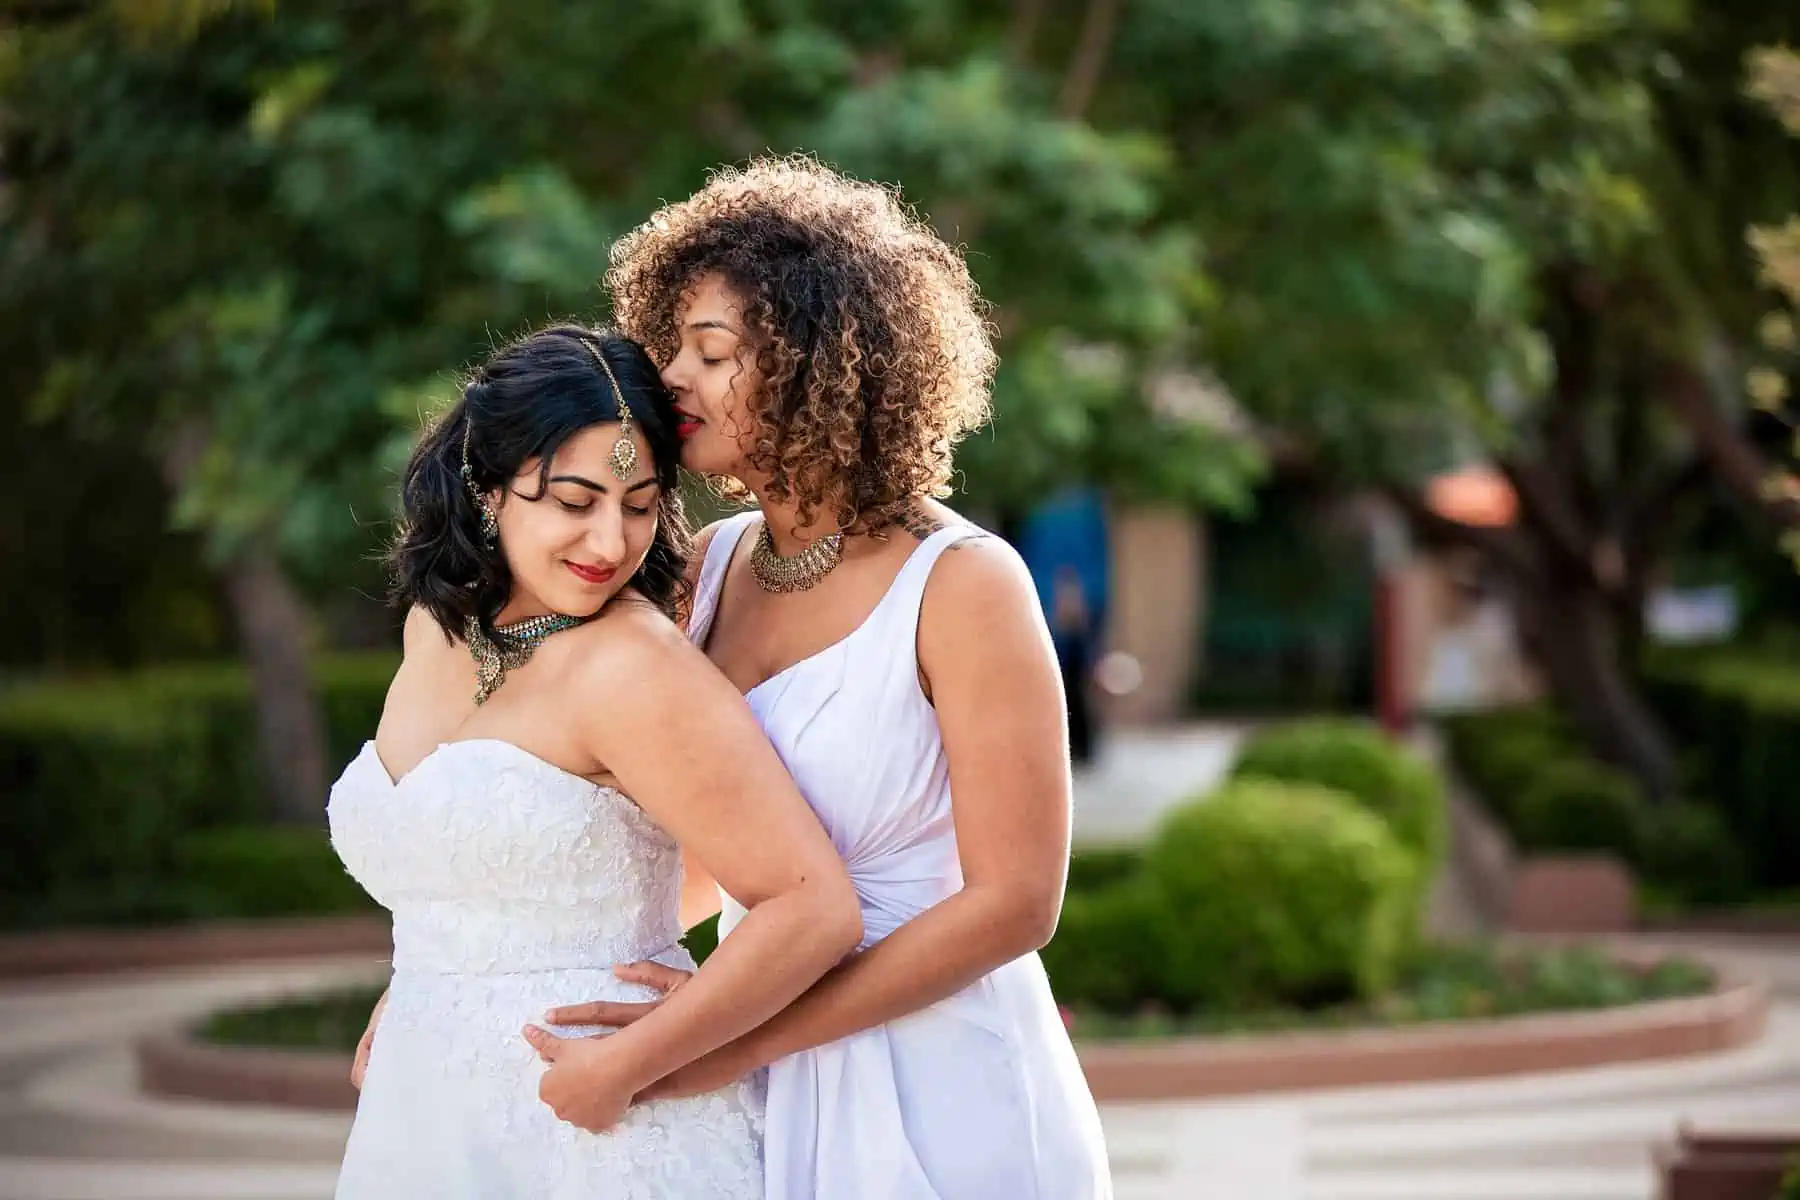 Two brides hugging each other in a garden.